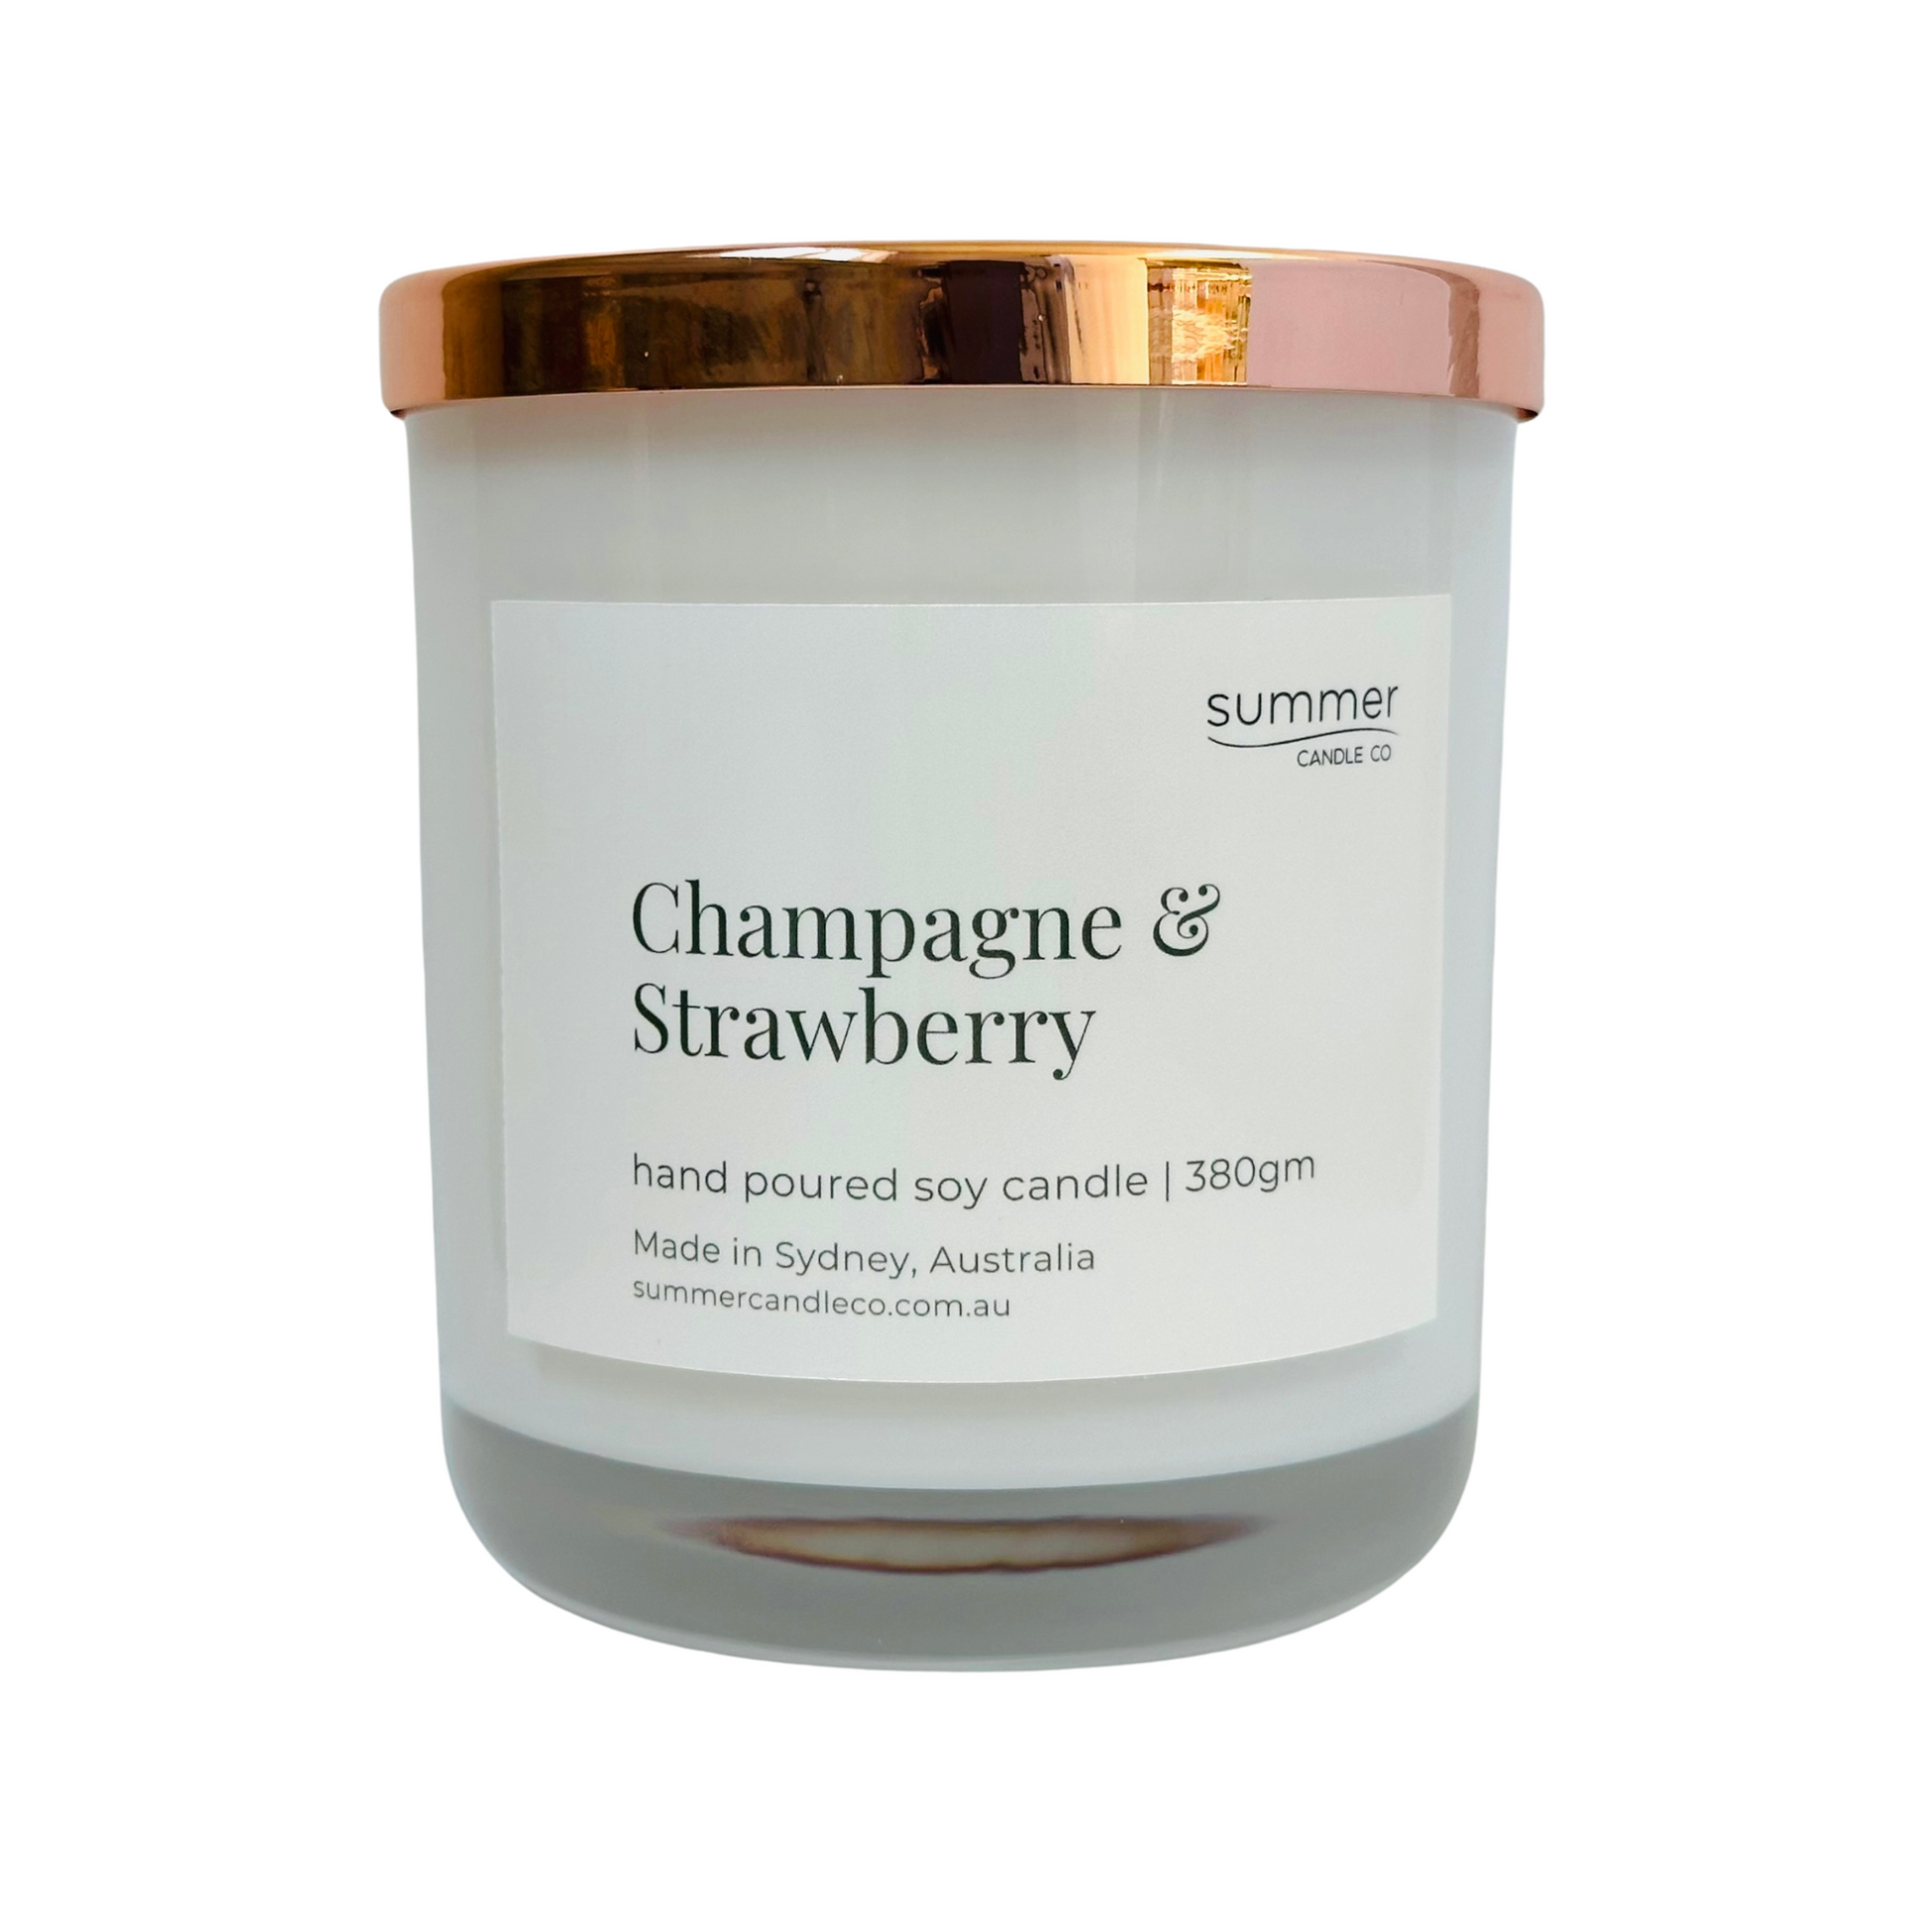 Lovely Hand Poured Soy Candle 380gram Fragrance of Champagne & Strawberry